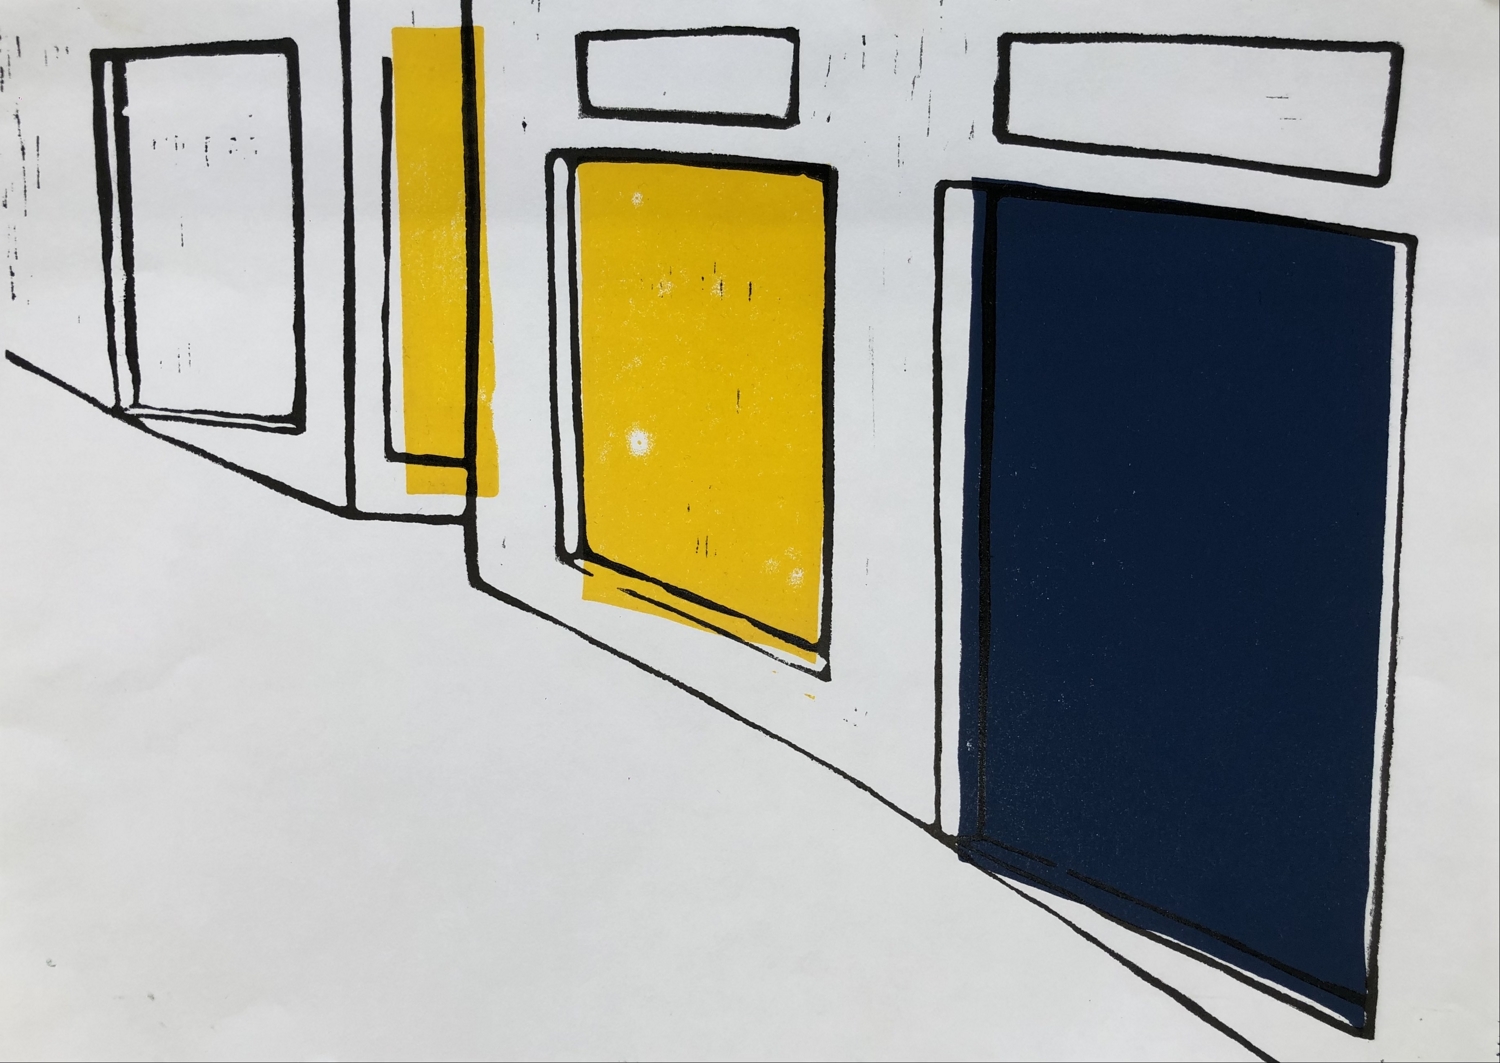 BA Fine Art work by Olivia Mays, showing a colourful abstract lino print